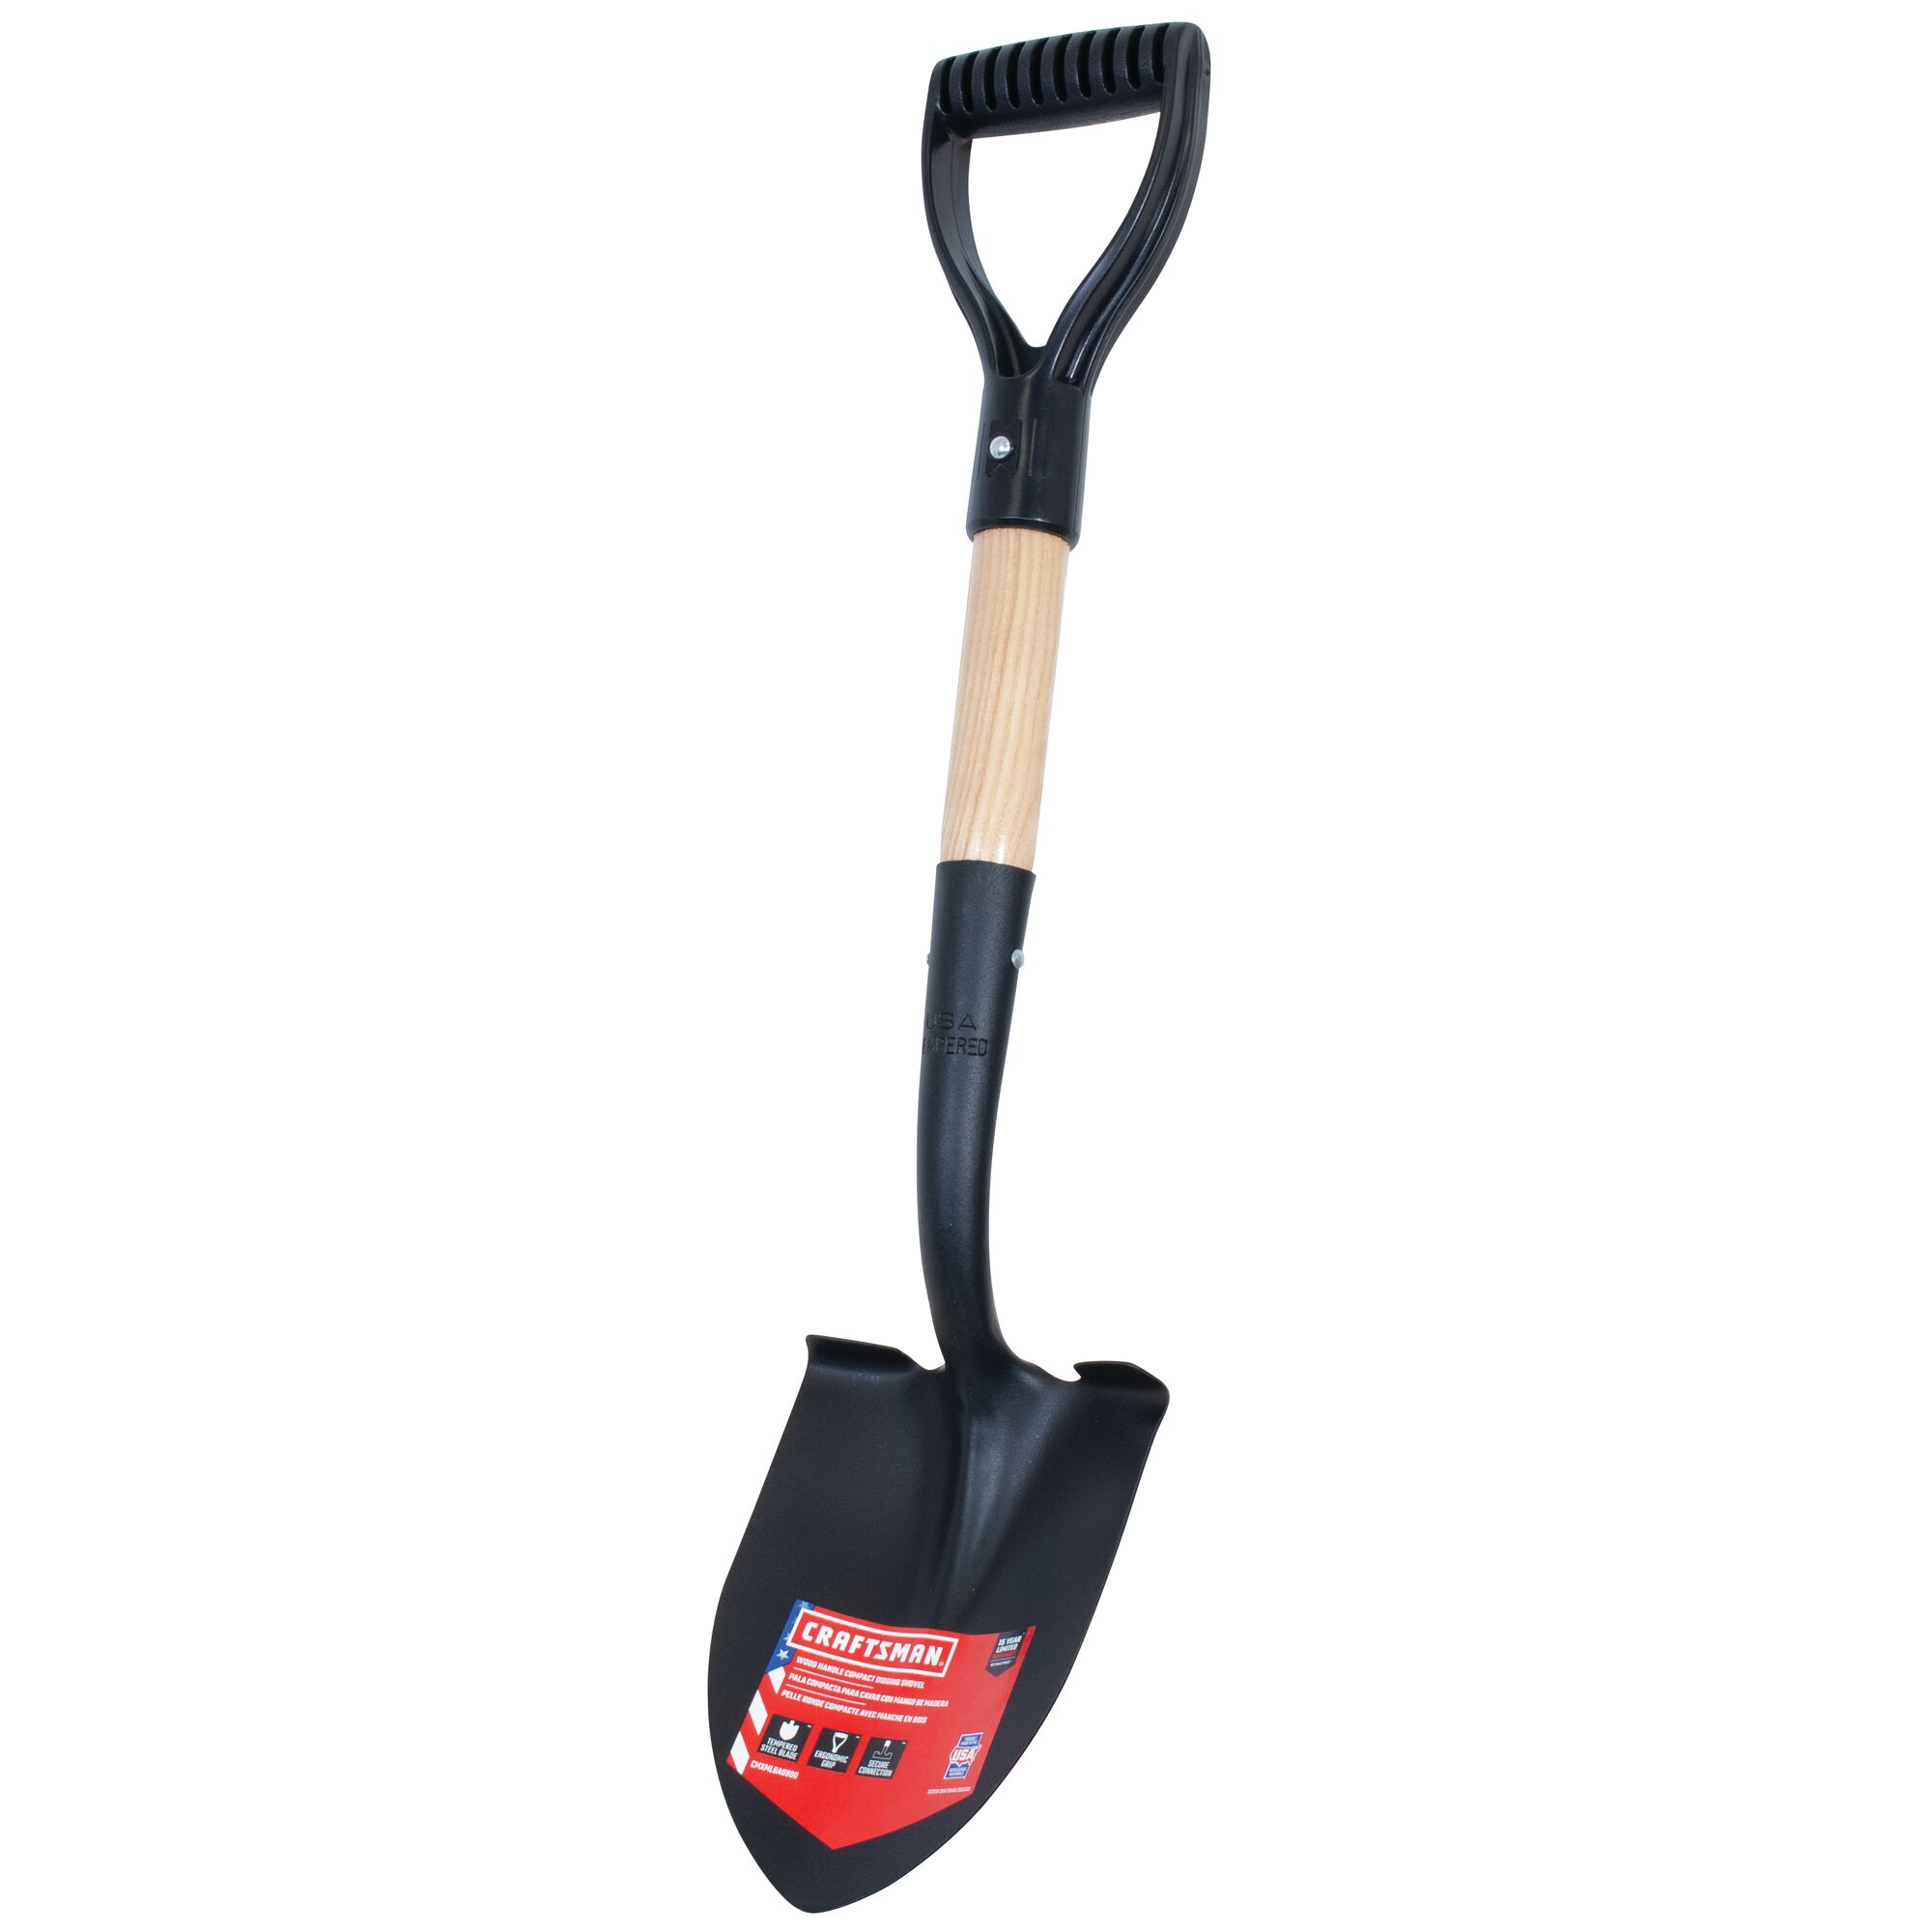 Right profile of wood handle compact digging shovel.